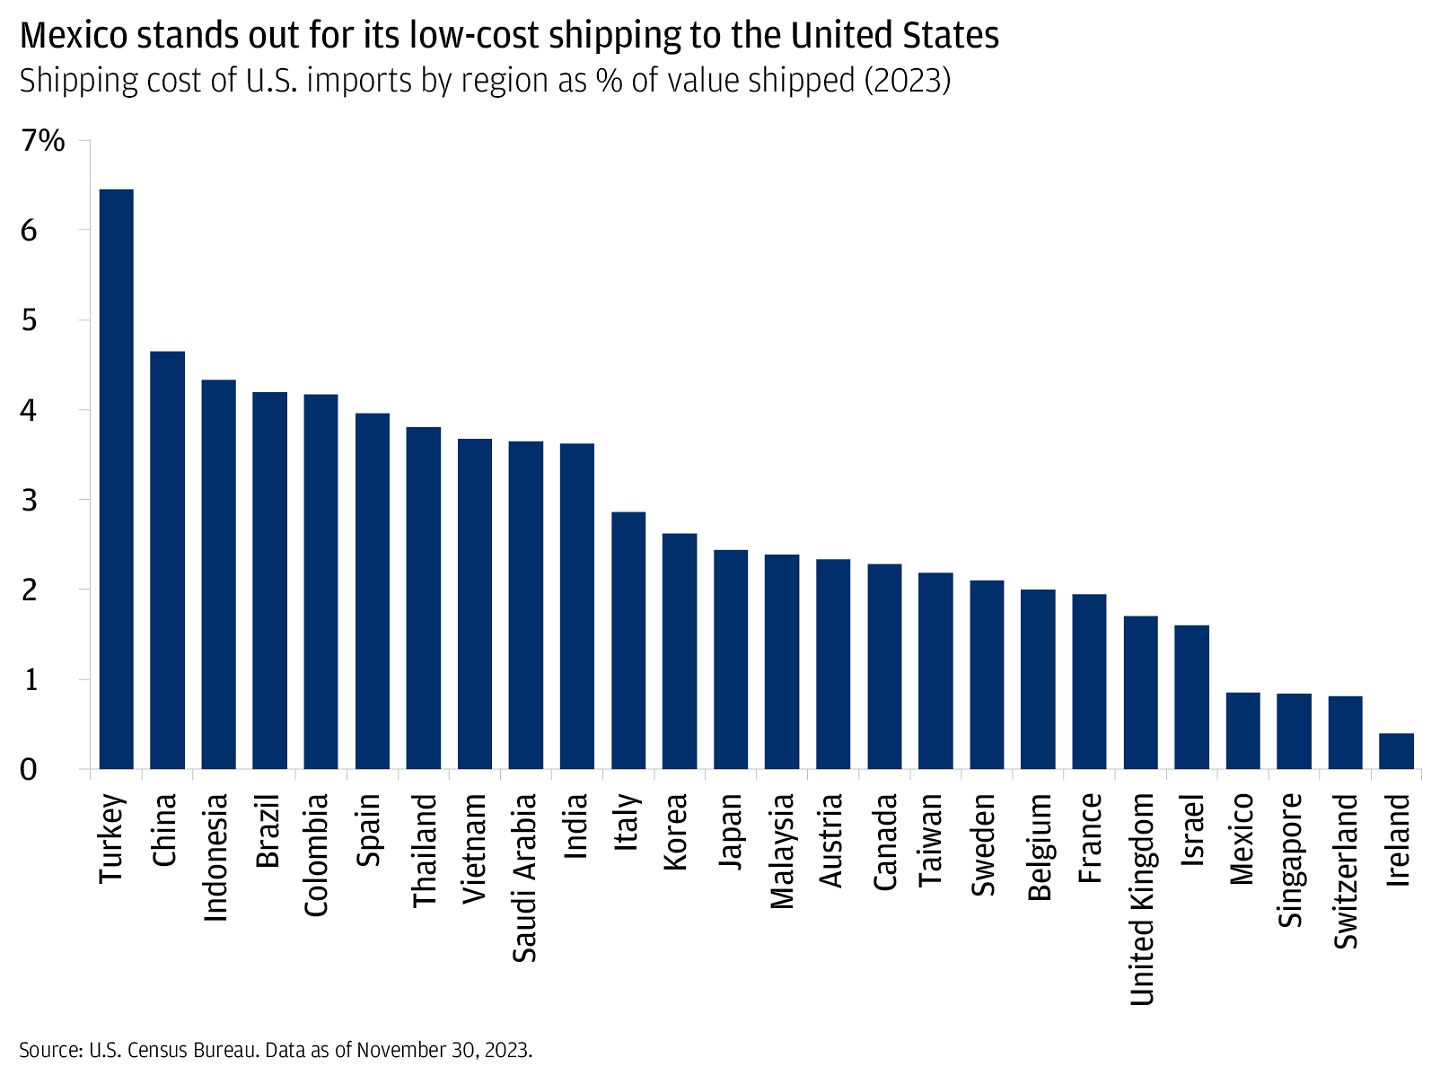 The bar graph describes the shipping costs of U.S. imports by region in 2023. It uses the shipping cost as % of value shipped.